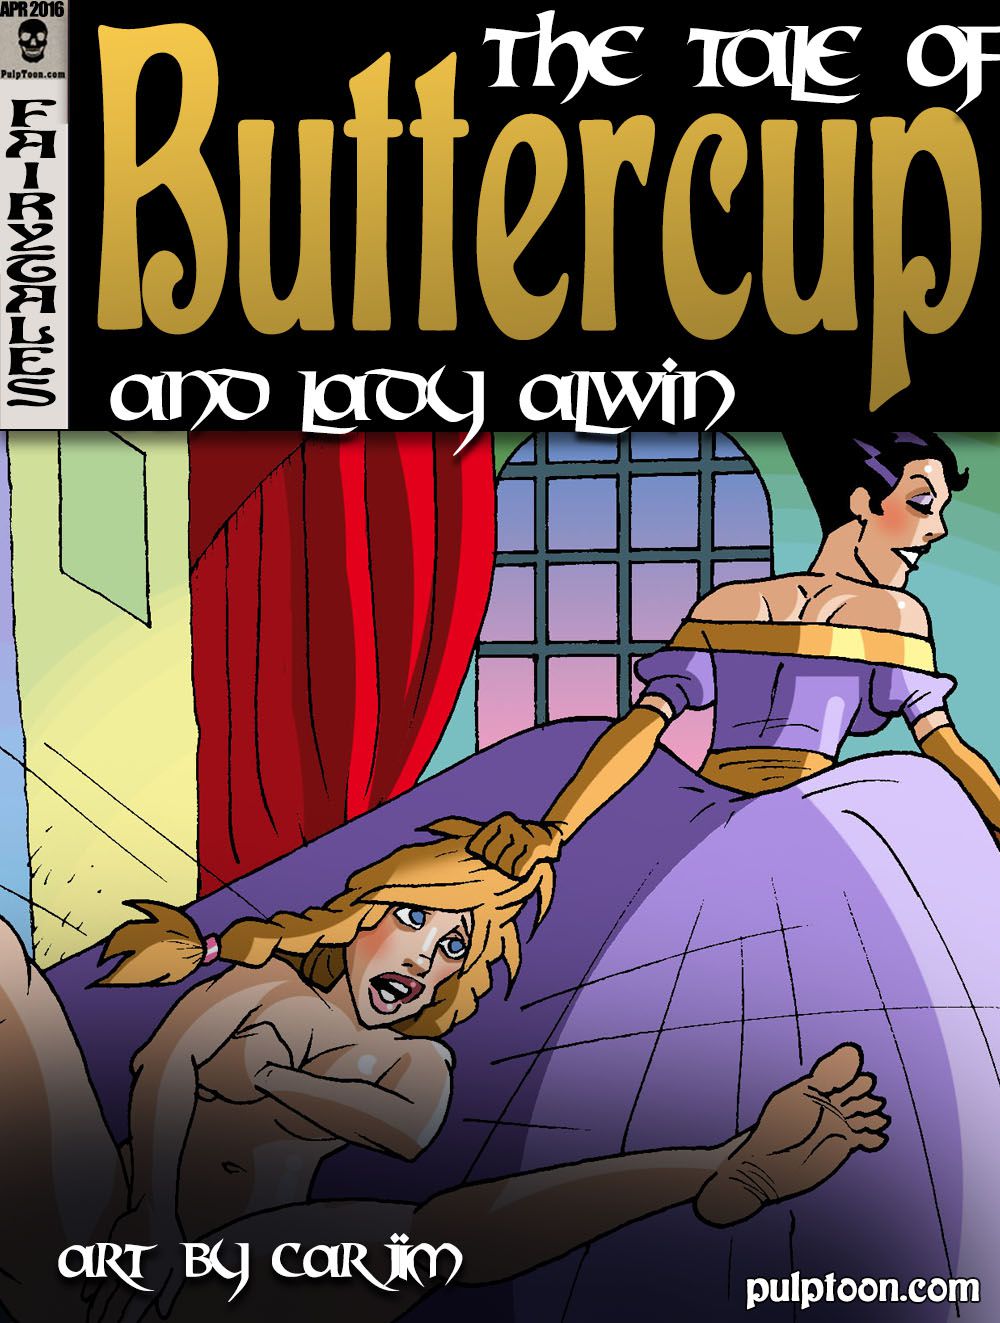 [Pulptoon] The Tale Of Buttercup And Lady Alwin 1